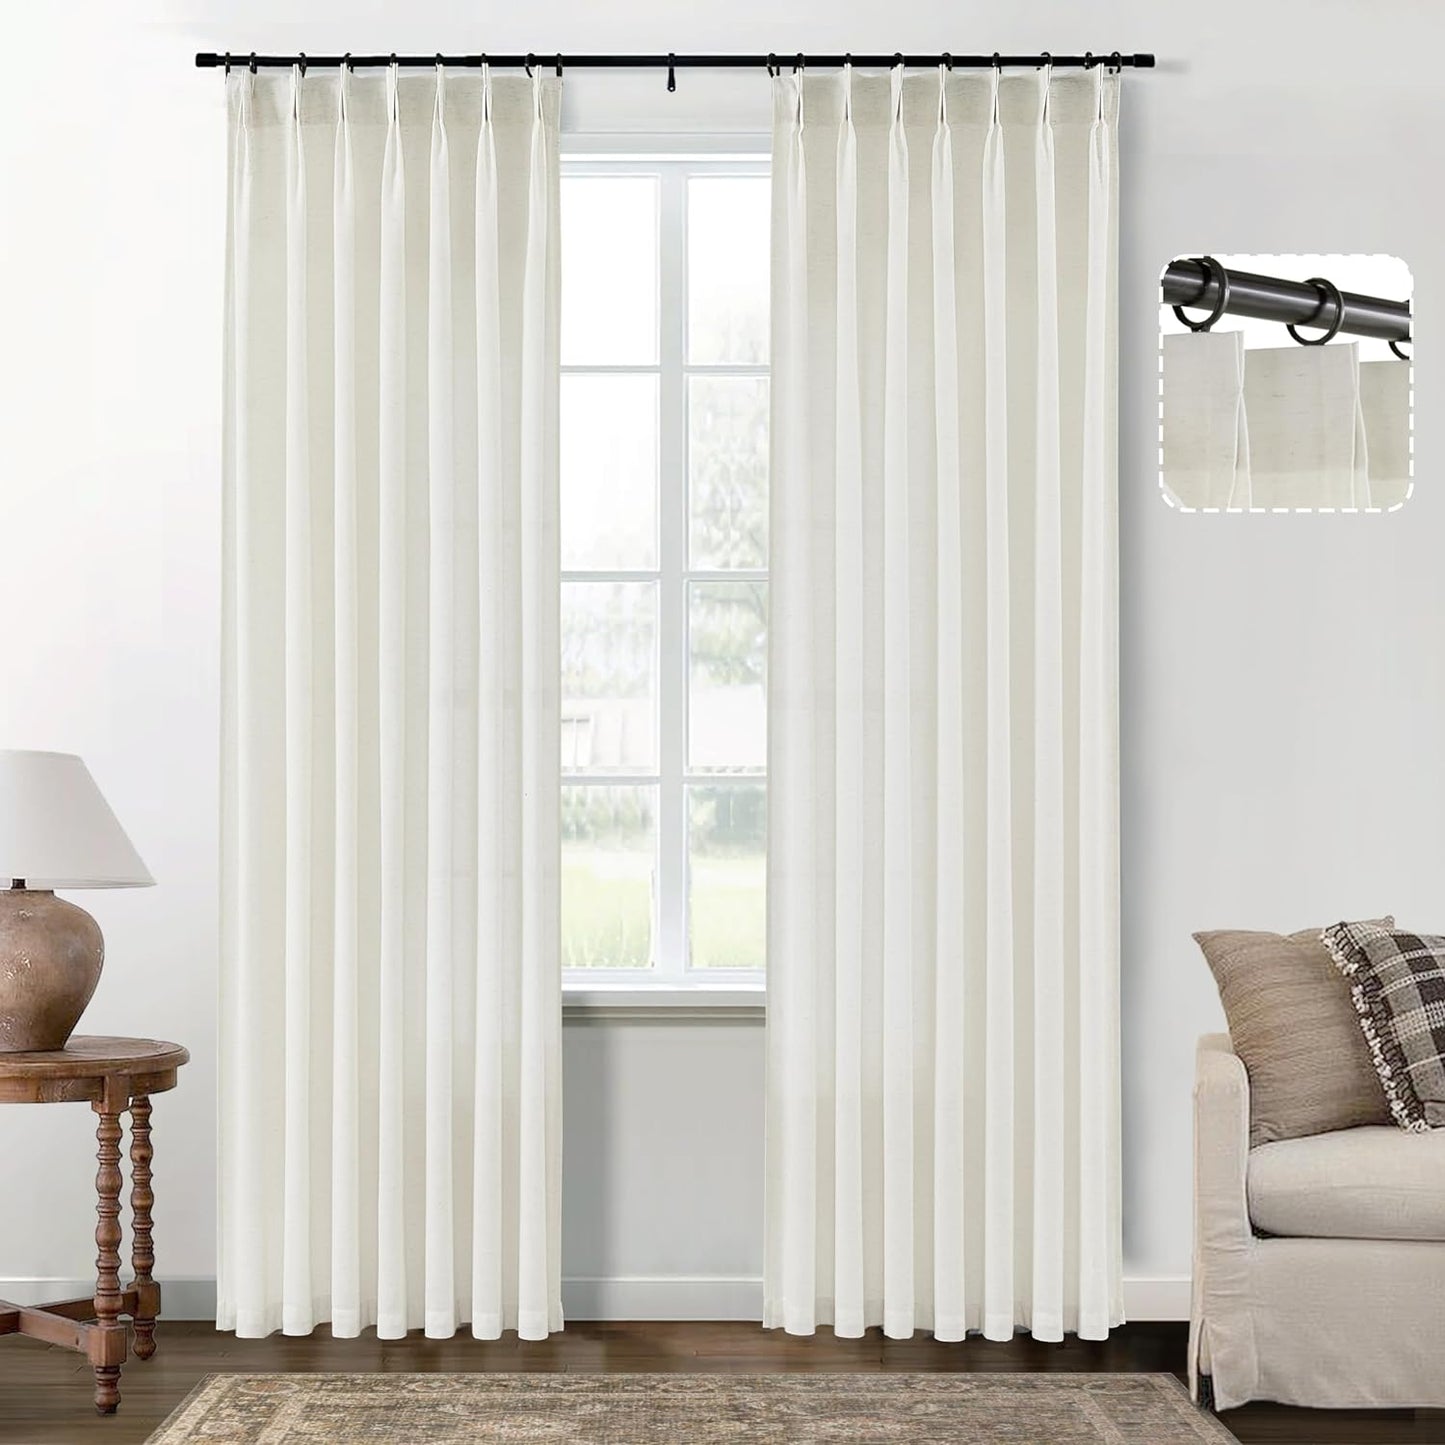 SHINELAND White Linen Curtains 84 Inches Long for Bedroom 2 Panels Set,Sheer Boho Pinch Pleated with Hooks Back Tab Window Sheers Draperies 84 Length for Dining Room Living Room Office at Home  SHINELAND Natural 2X(40"Wx120"L) 